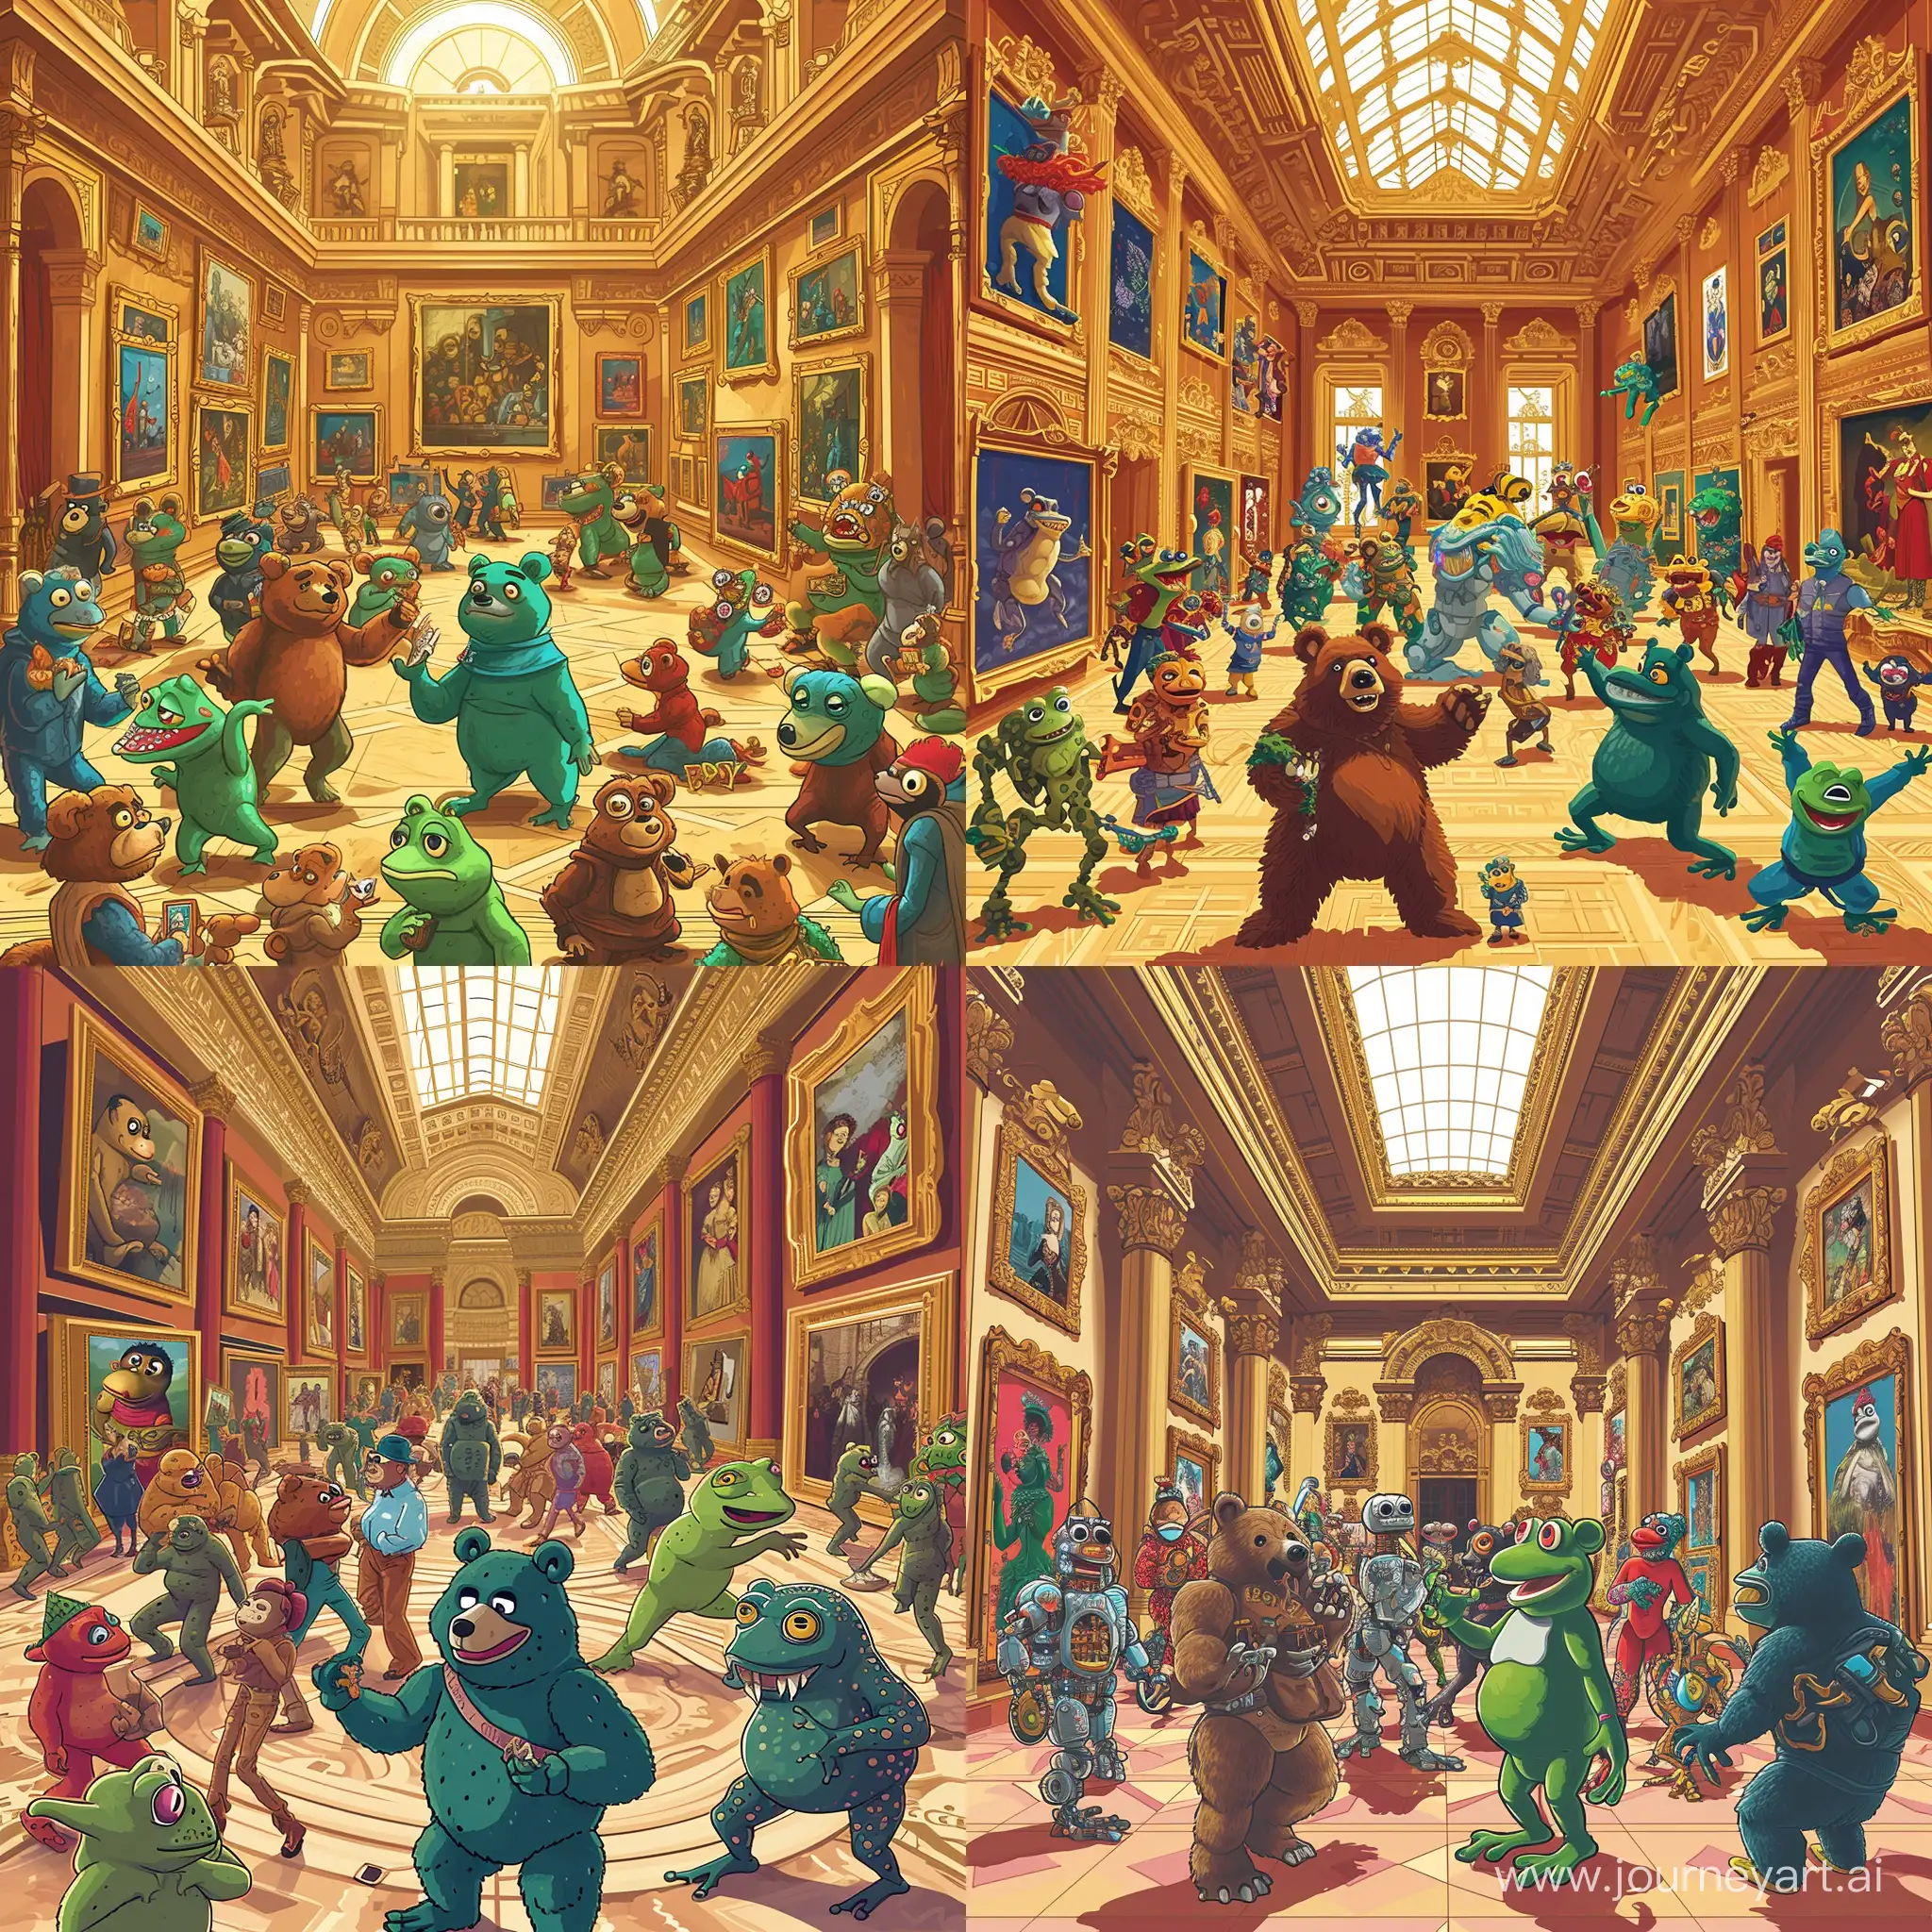 "Create an intricate and vibrant illustration of a grand art gallery filled with a wide array of bear and pepe frog characters and artworks. Each character should be unique and whimsical, inspired by various elements of pop culture and internet memes. The gallery is richly decorated with golden frames, each displaying imaginative and colorful pieces of art that defy conventional themes. The characters are engaging with the art and each other in exaggerated and comical ways, some posing while others interact playfully. The setting is opulent with high ceilings and classical architecture, but the atmosphere is one of quirky, irreverent fun. The overall tone is playful and should blend elements of classical art with modern internet culture in a harmonious and visually stimulating composition."





